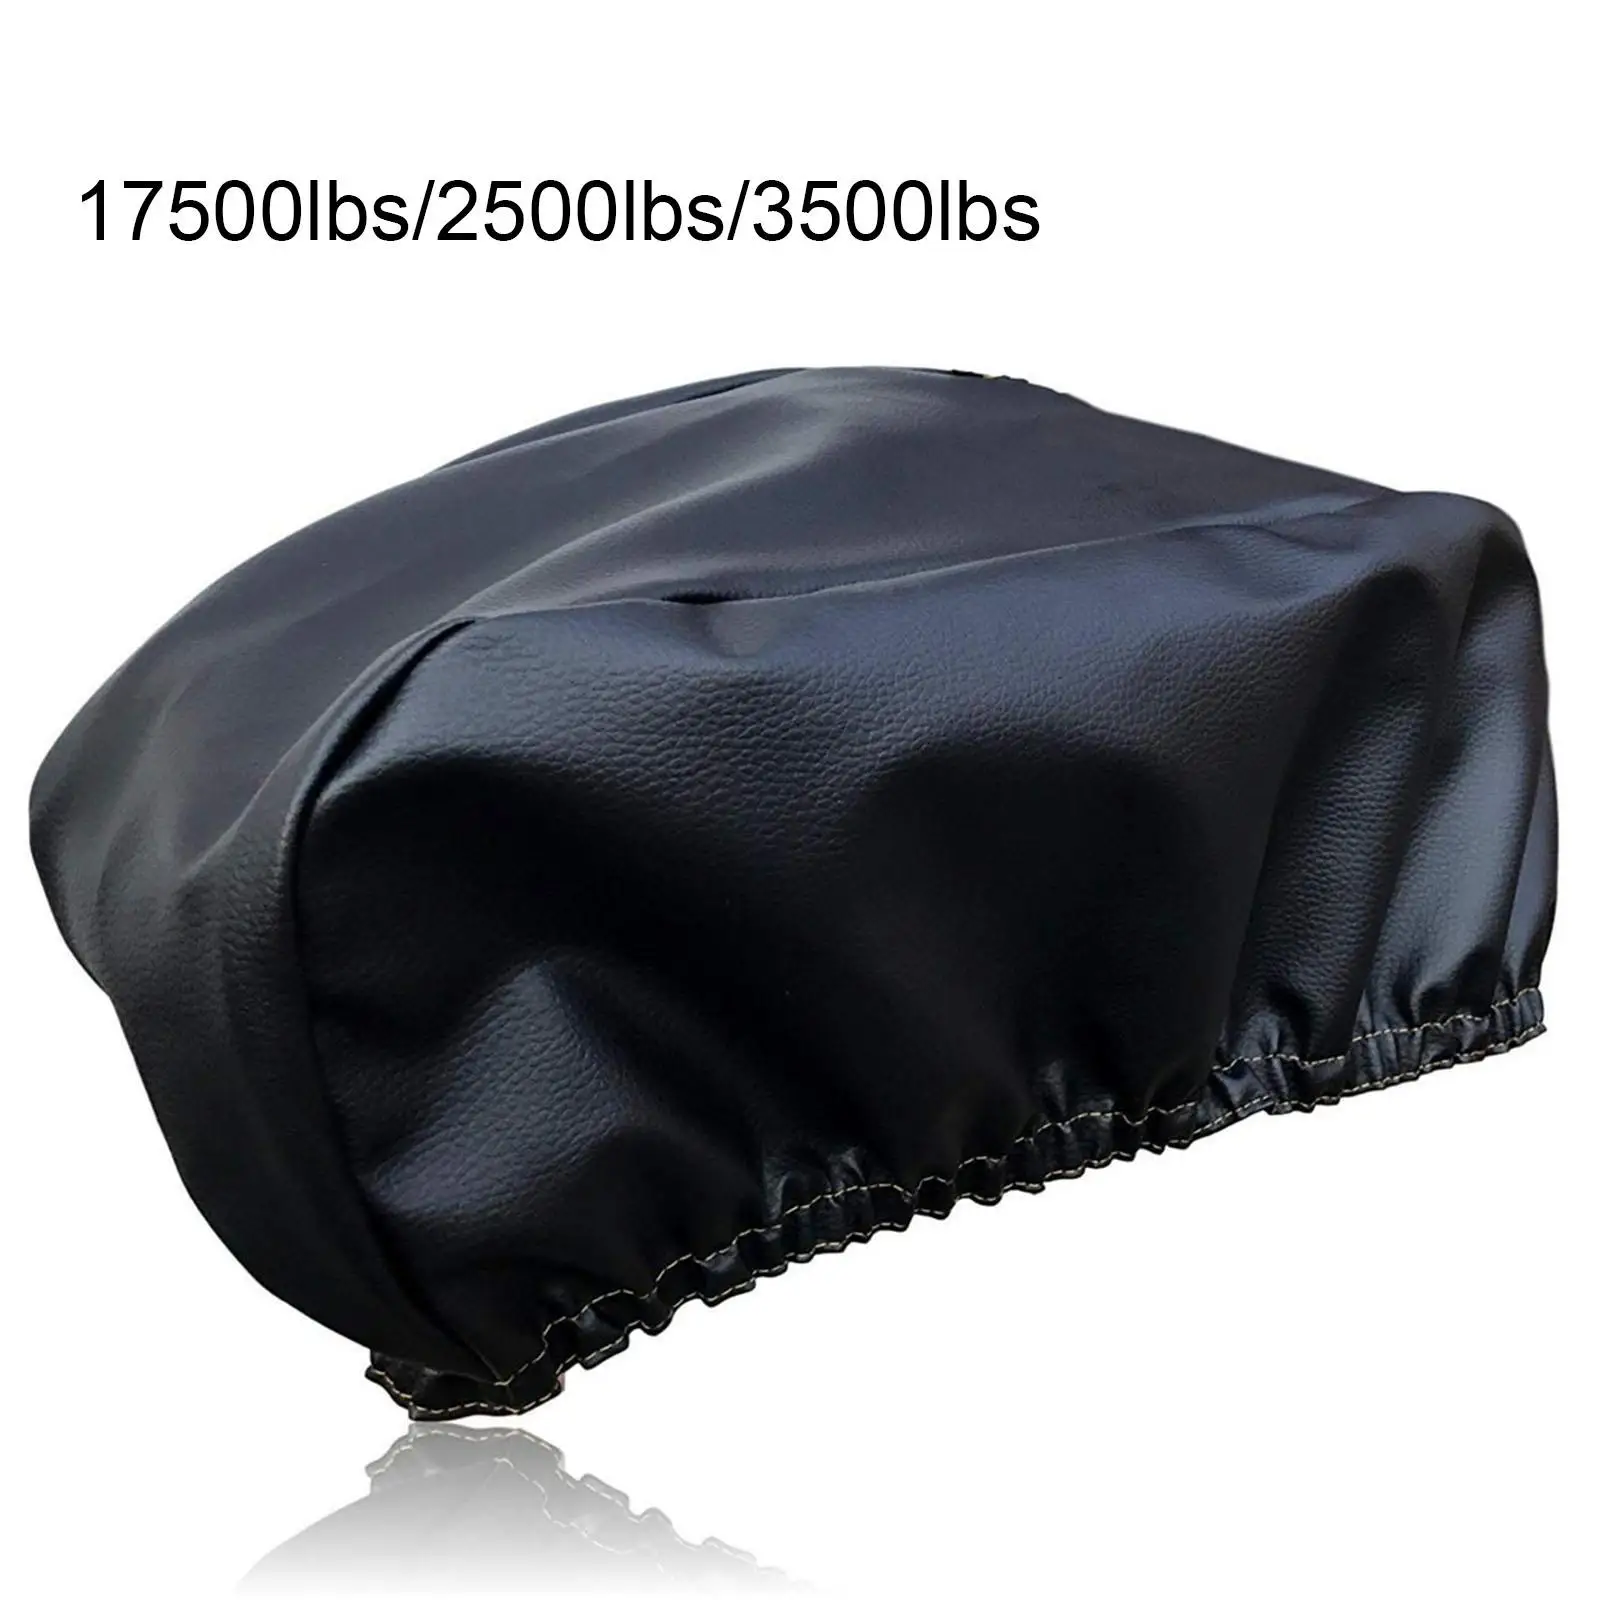 Car Winch Cover Durable Accessories Keep Clean Heavy Duty Supplies Simple Installation Waterproof Protector Dustproof Dust Cover